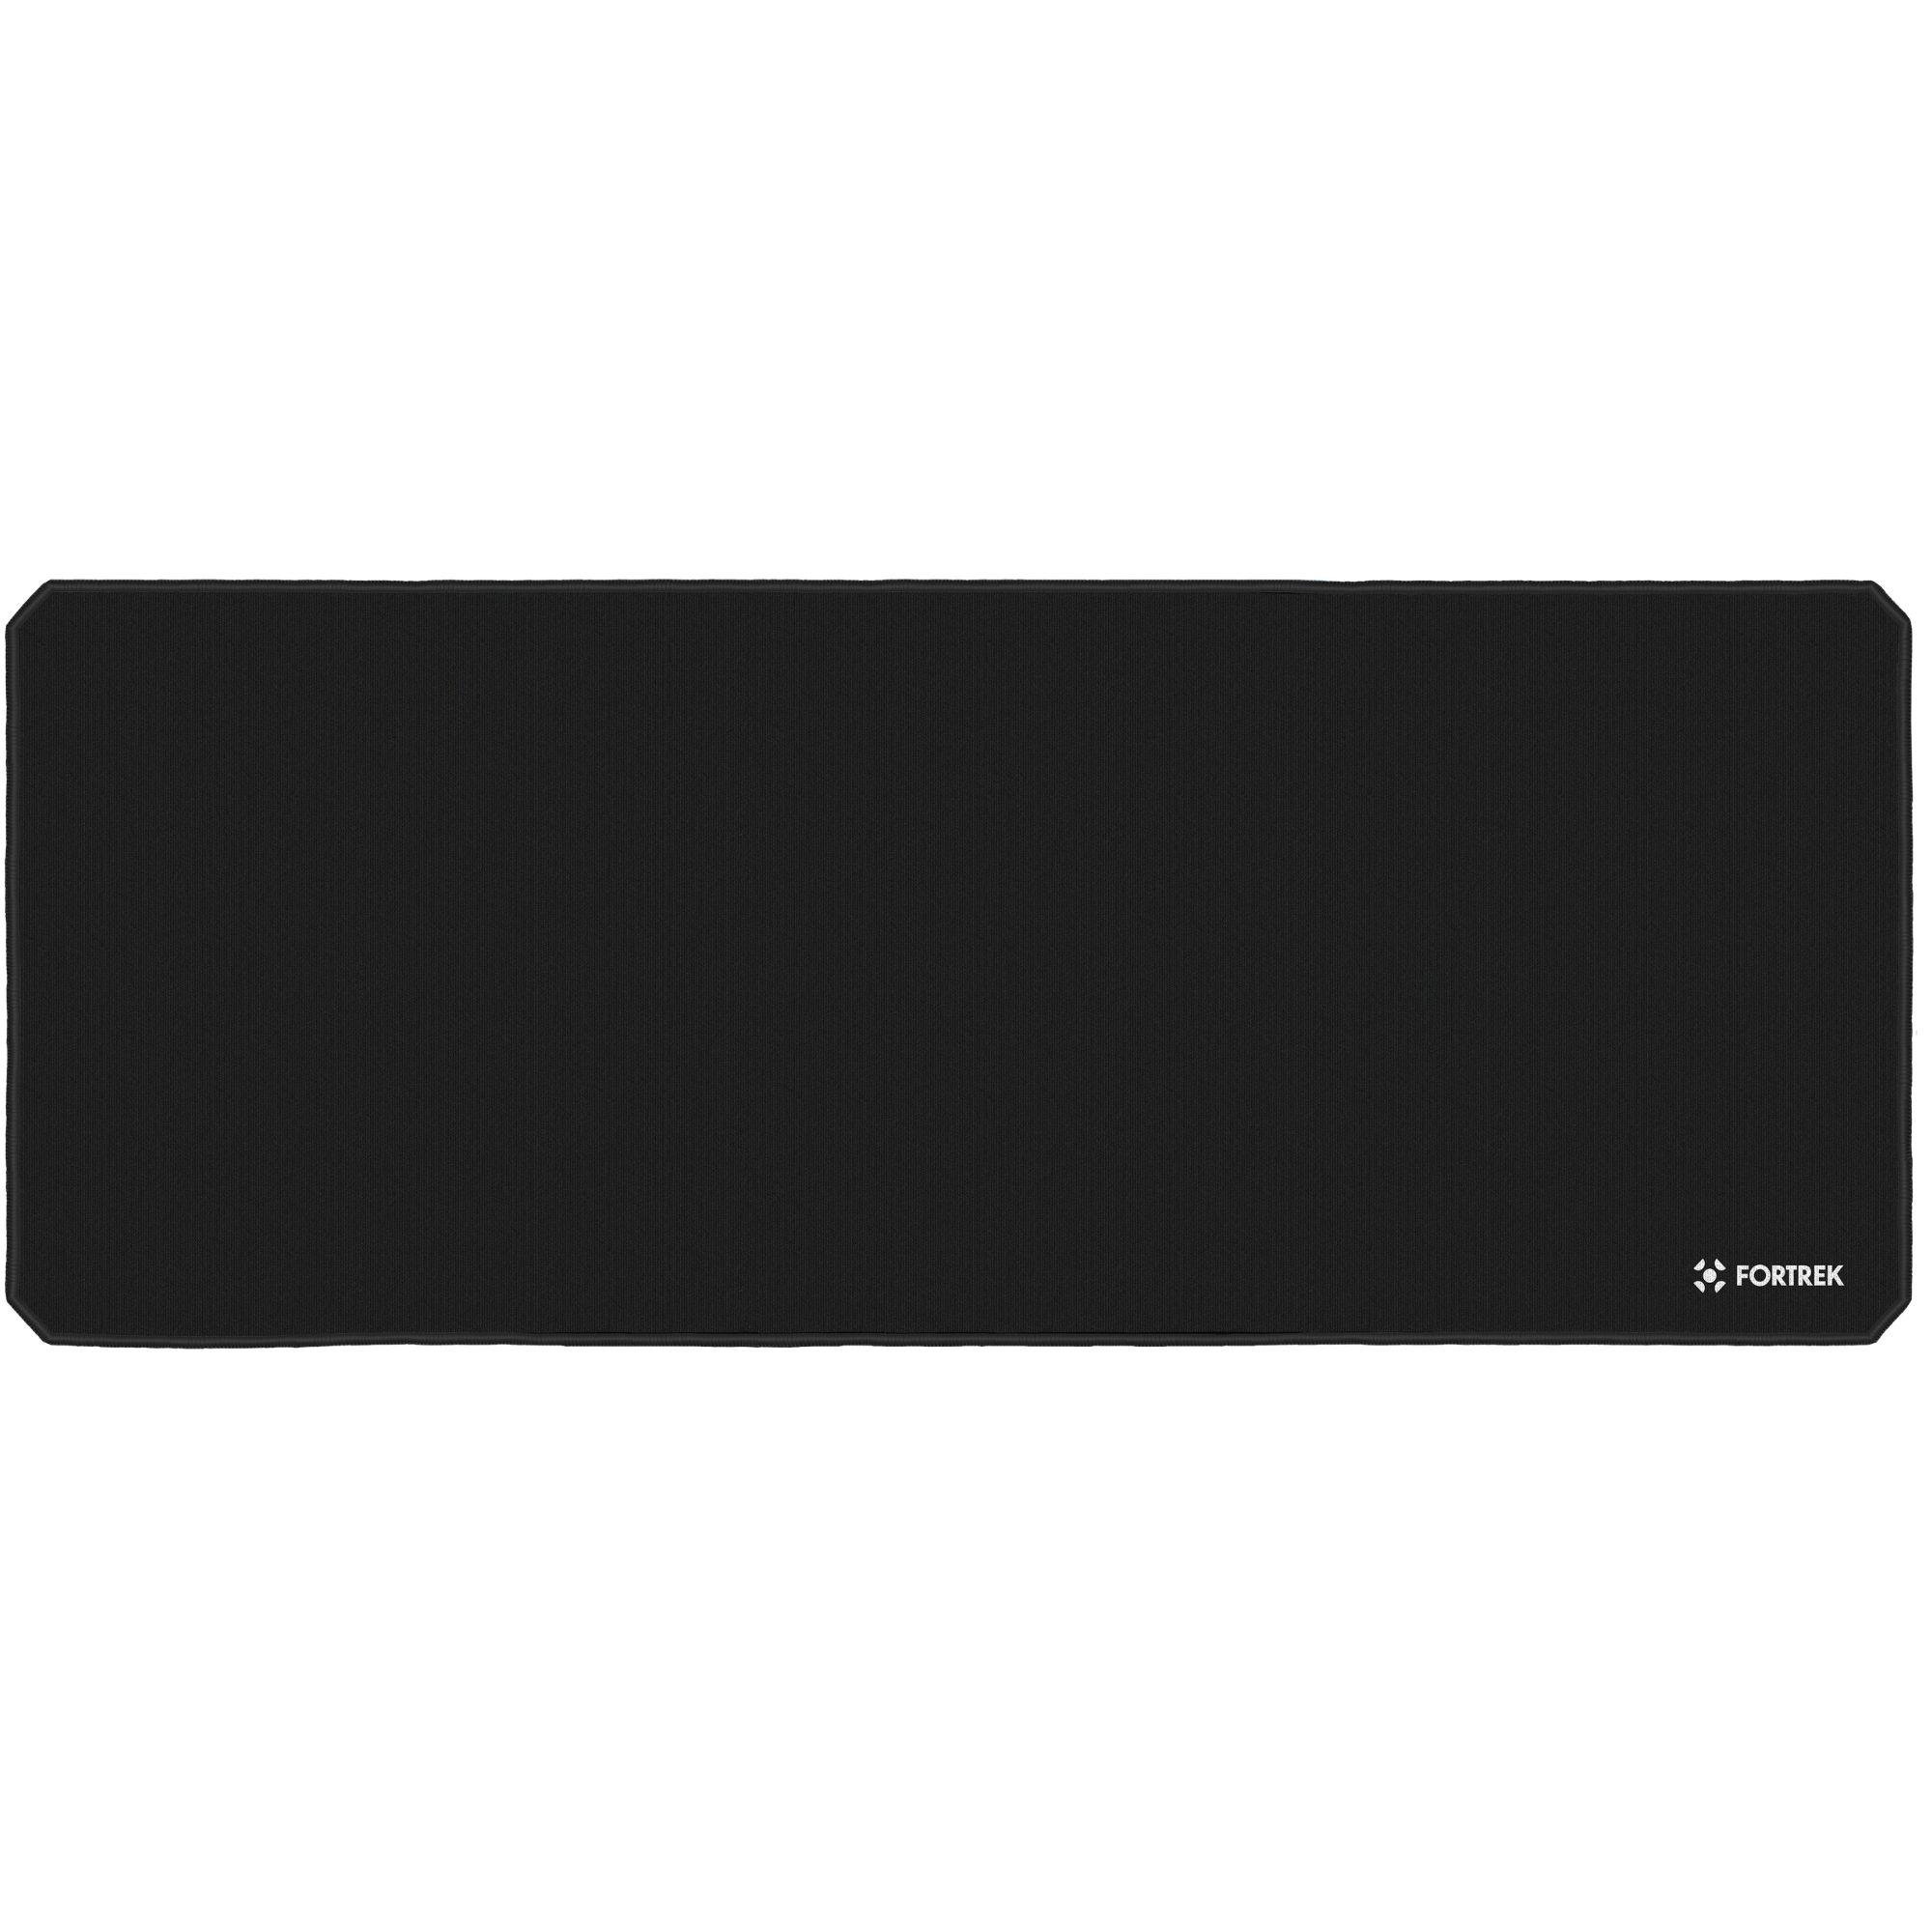 Mouse Pad Gamer Fortrek Speed MPG103 (800x300mm) Preto